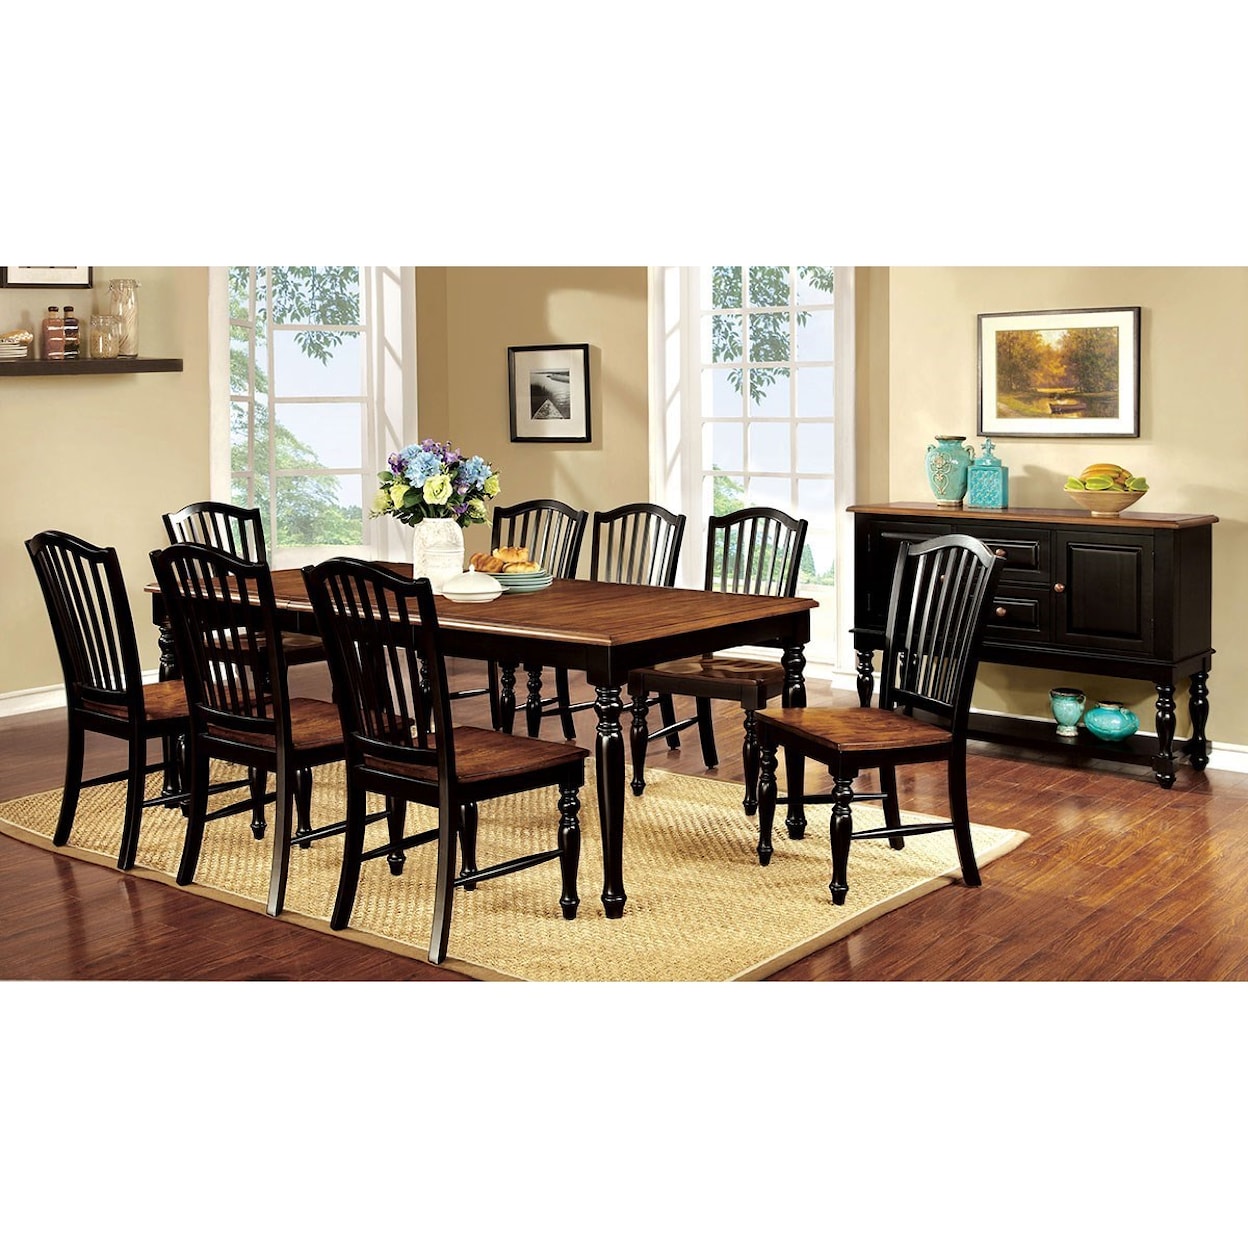 Furniture of America Mayville Table and 8 Chairs